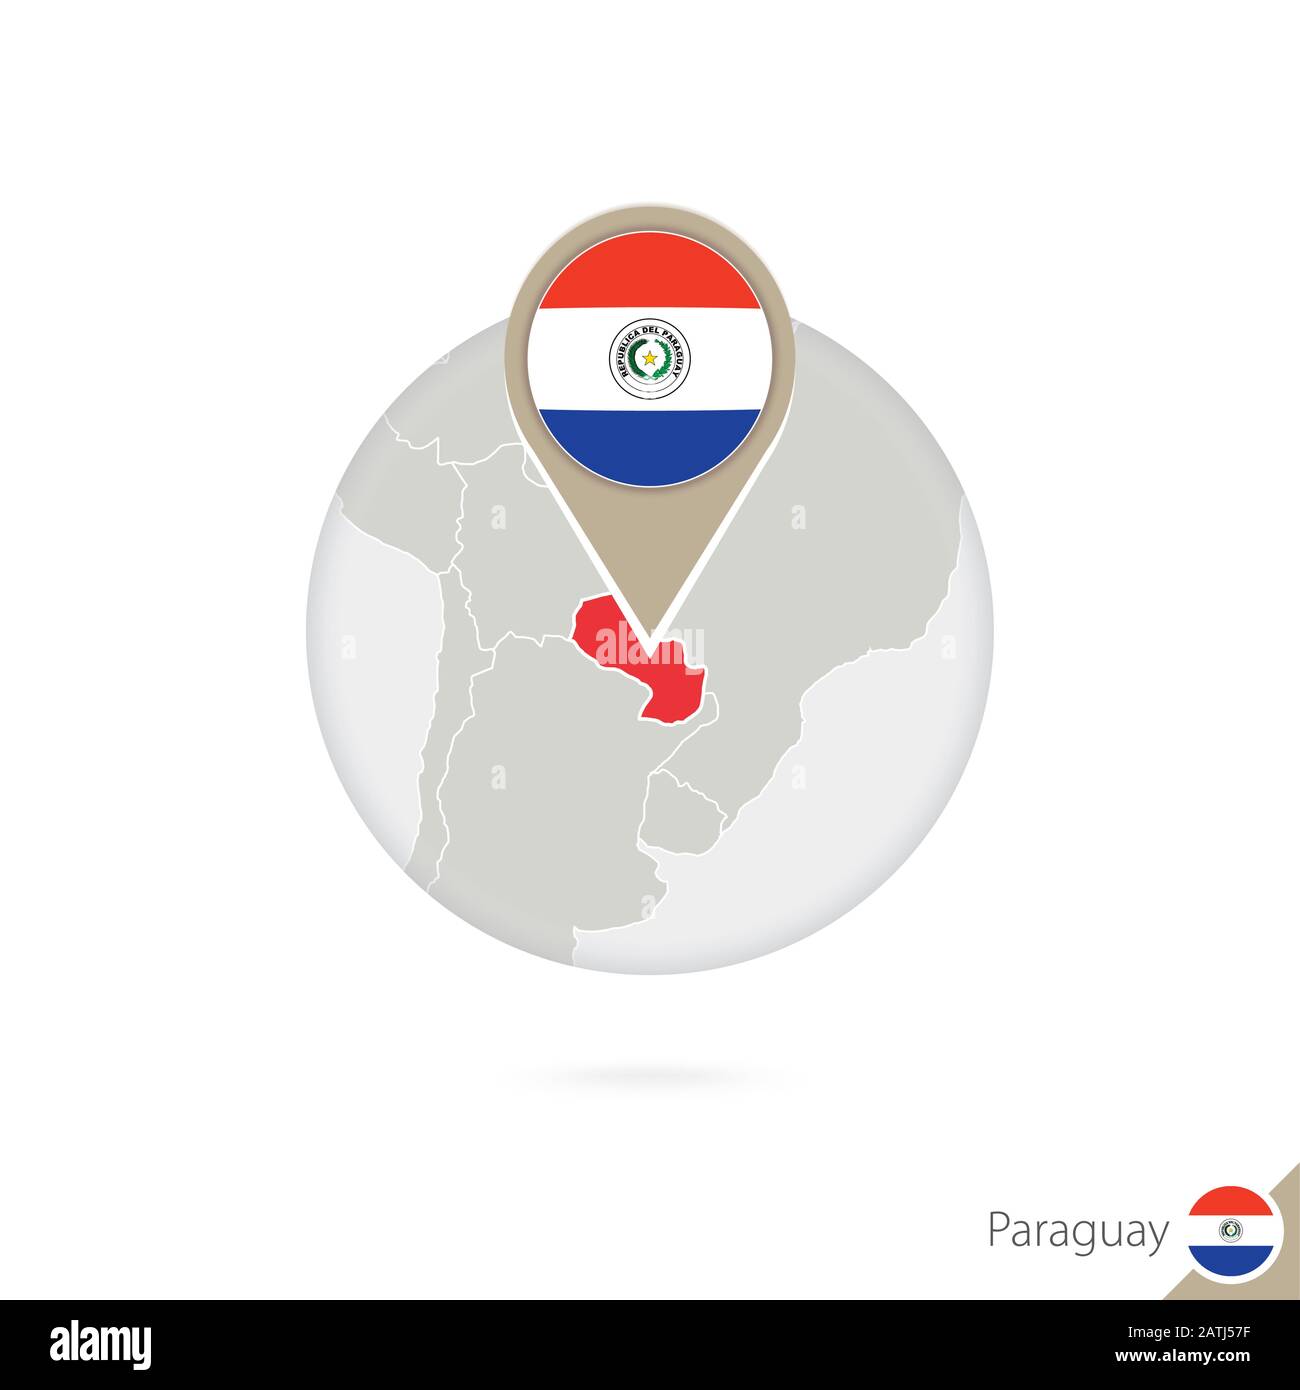 Paraguay map and flag in circle. Map of Paraguay, Paraguay flag pin. Map of Paraguay in the style of the globe. Vector Illustration. Stock Vector